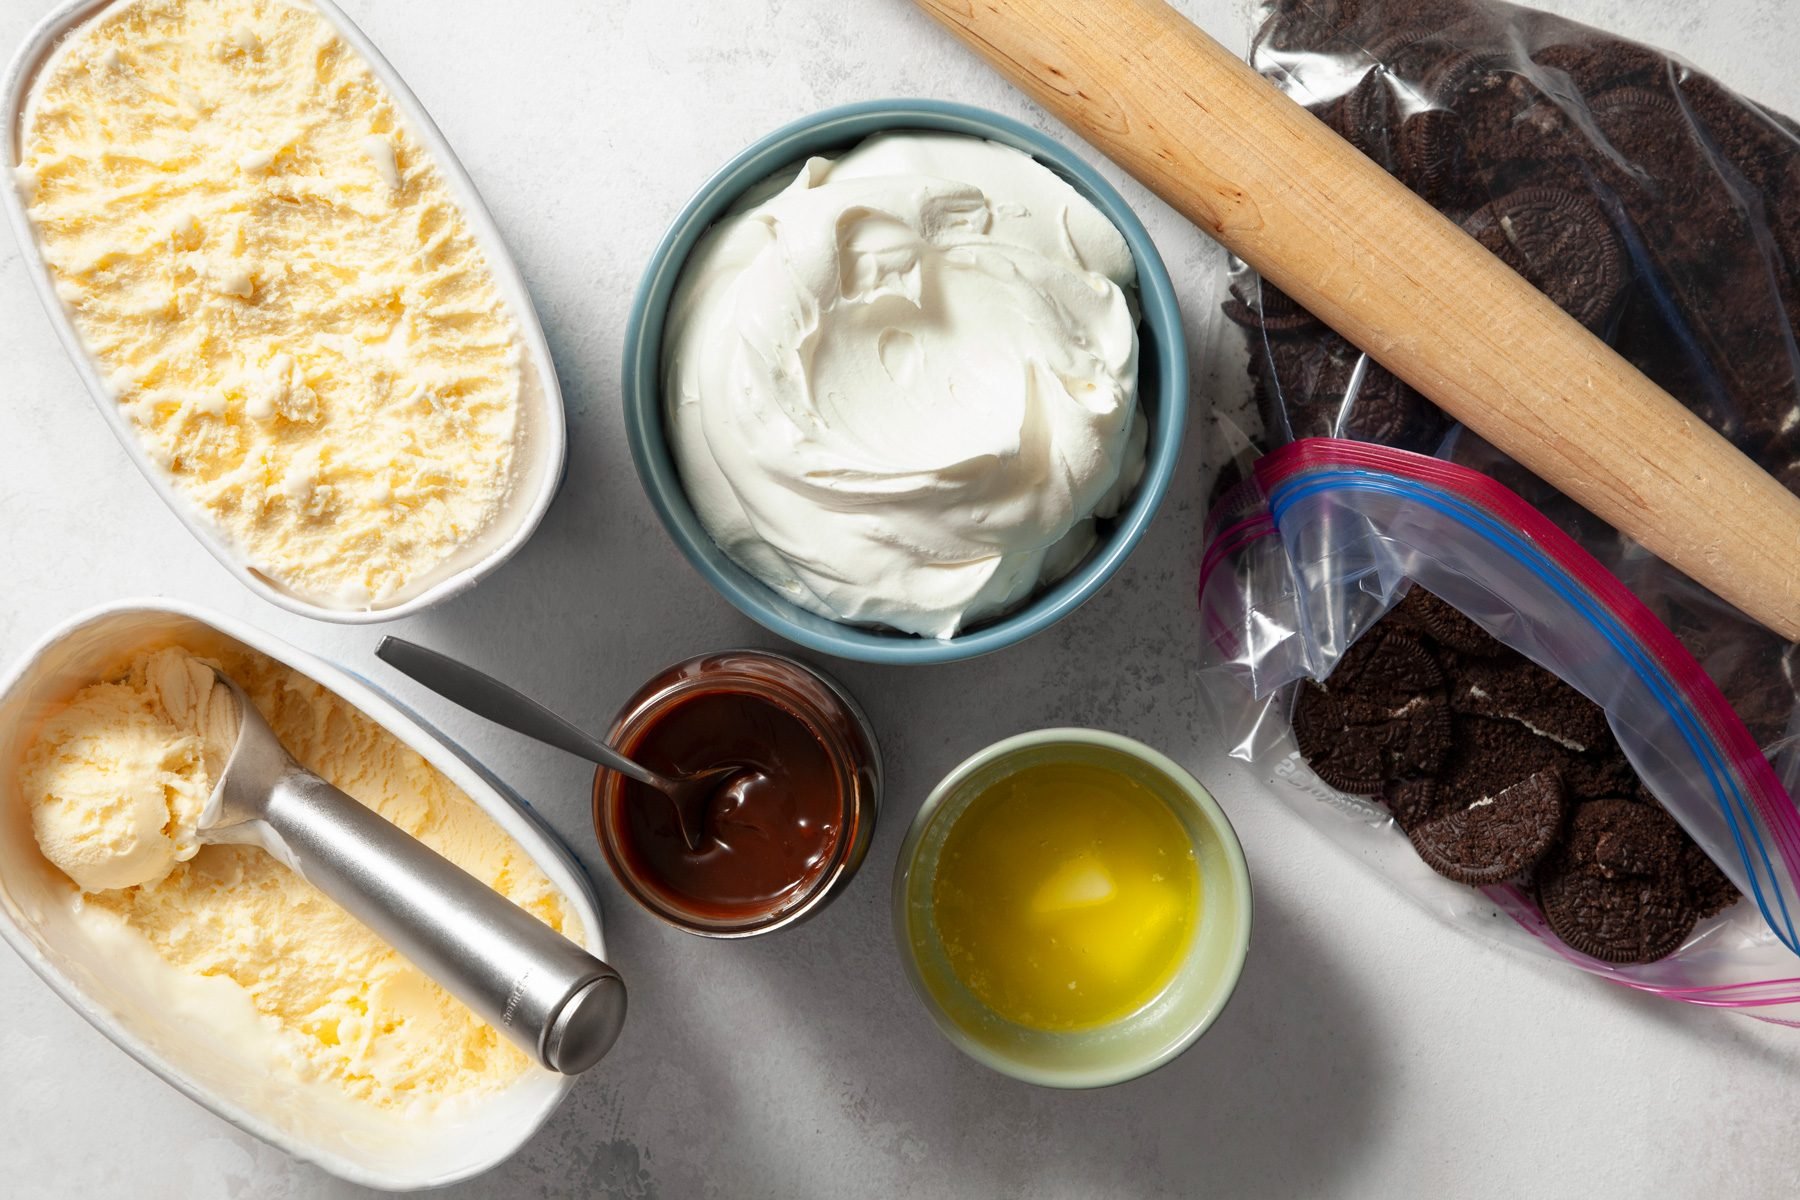 Ingredients for making an Oreo Ice Cream Cake